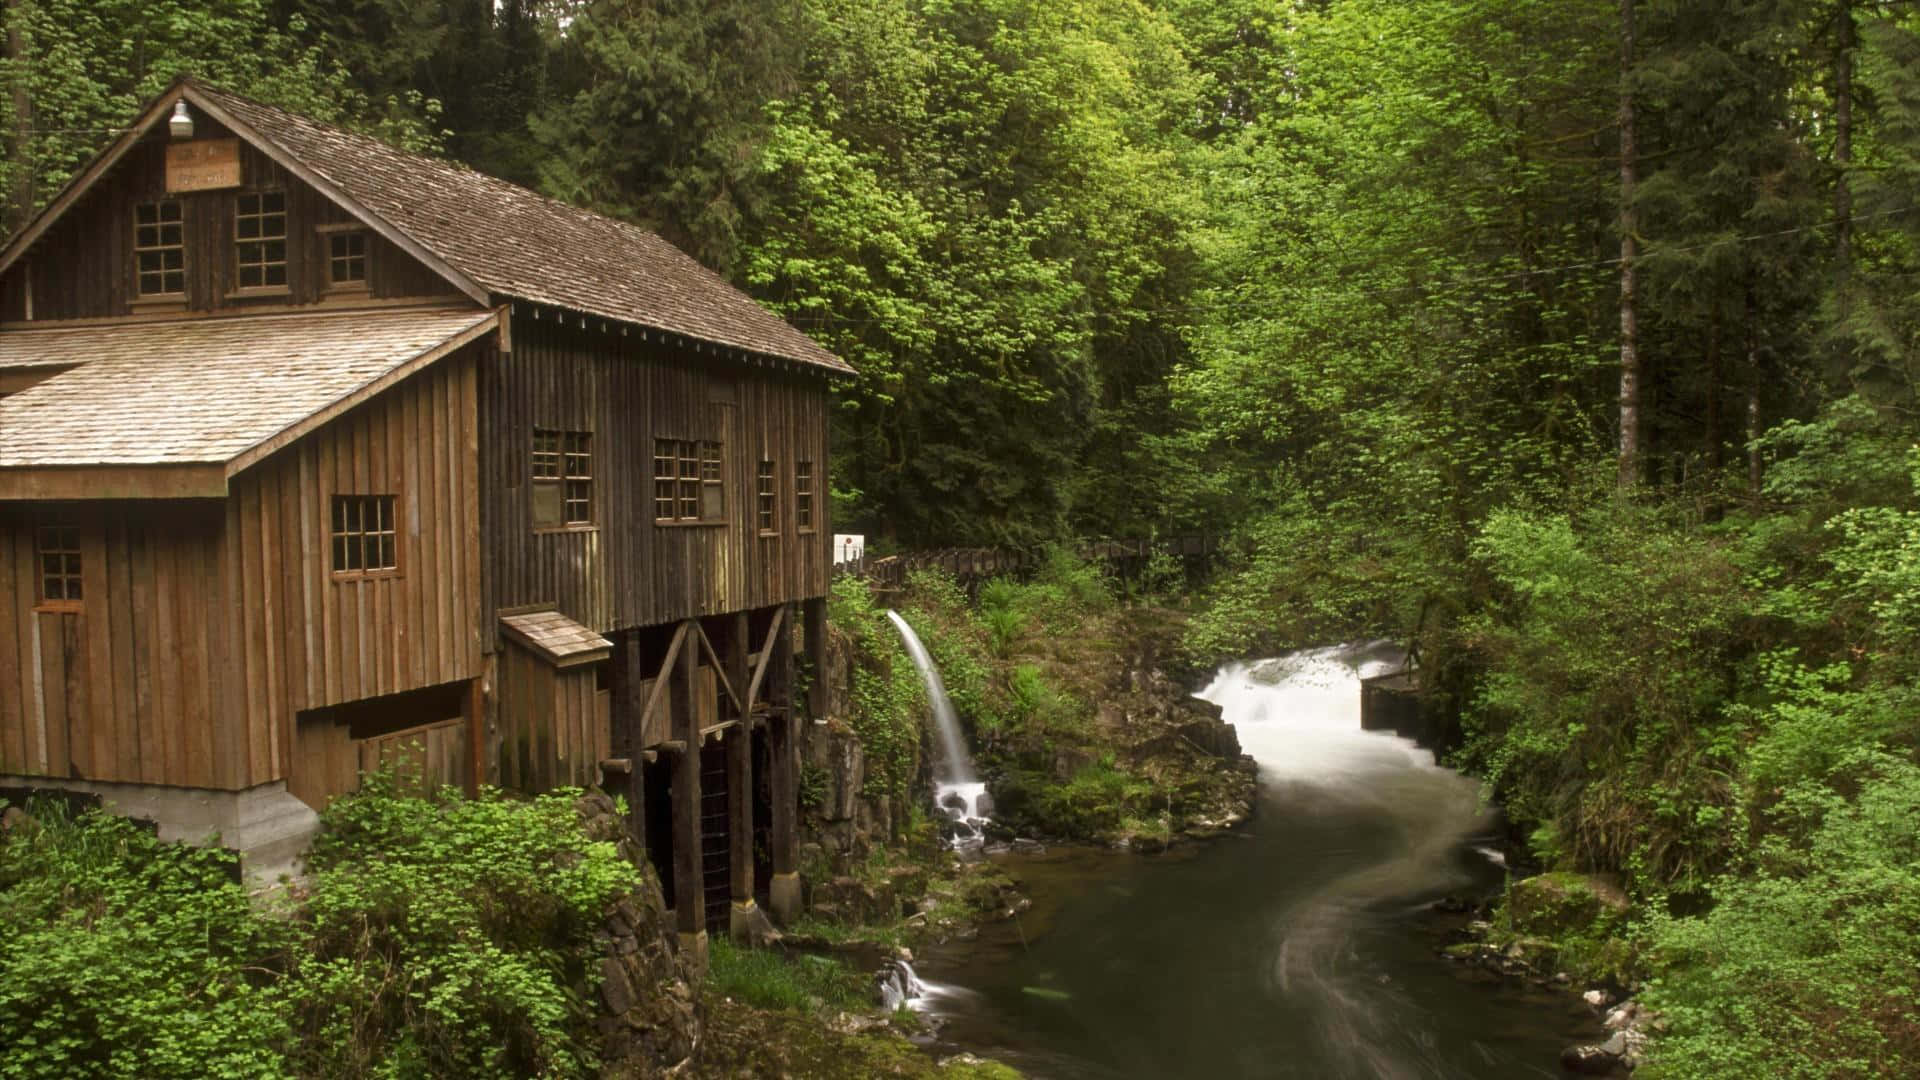 A Wooden Mill Is Surrounded By A River And Trees